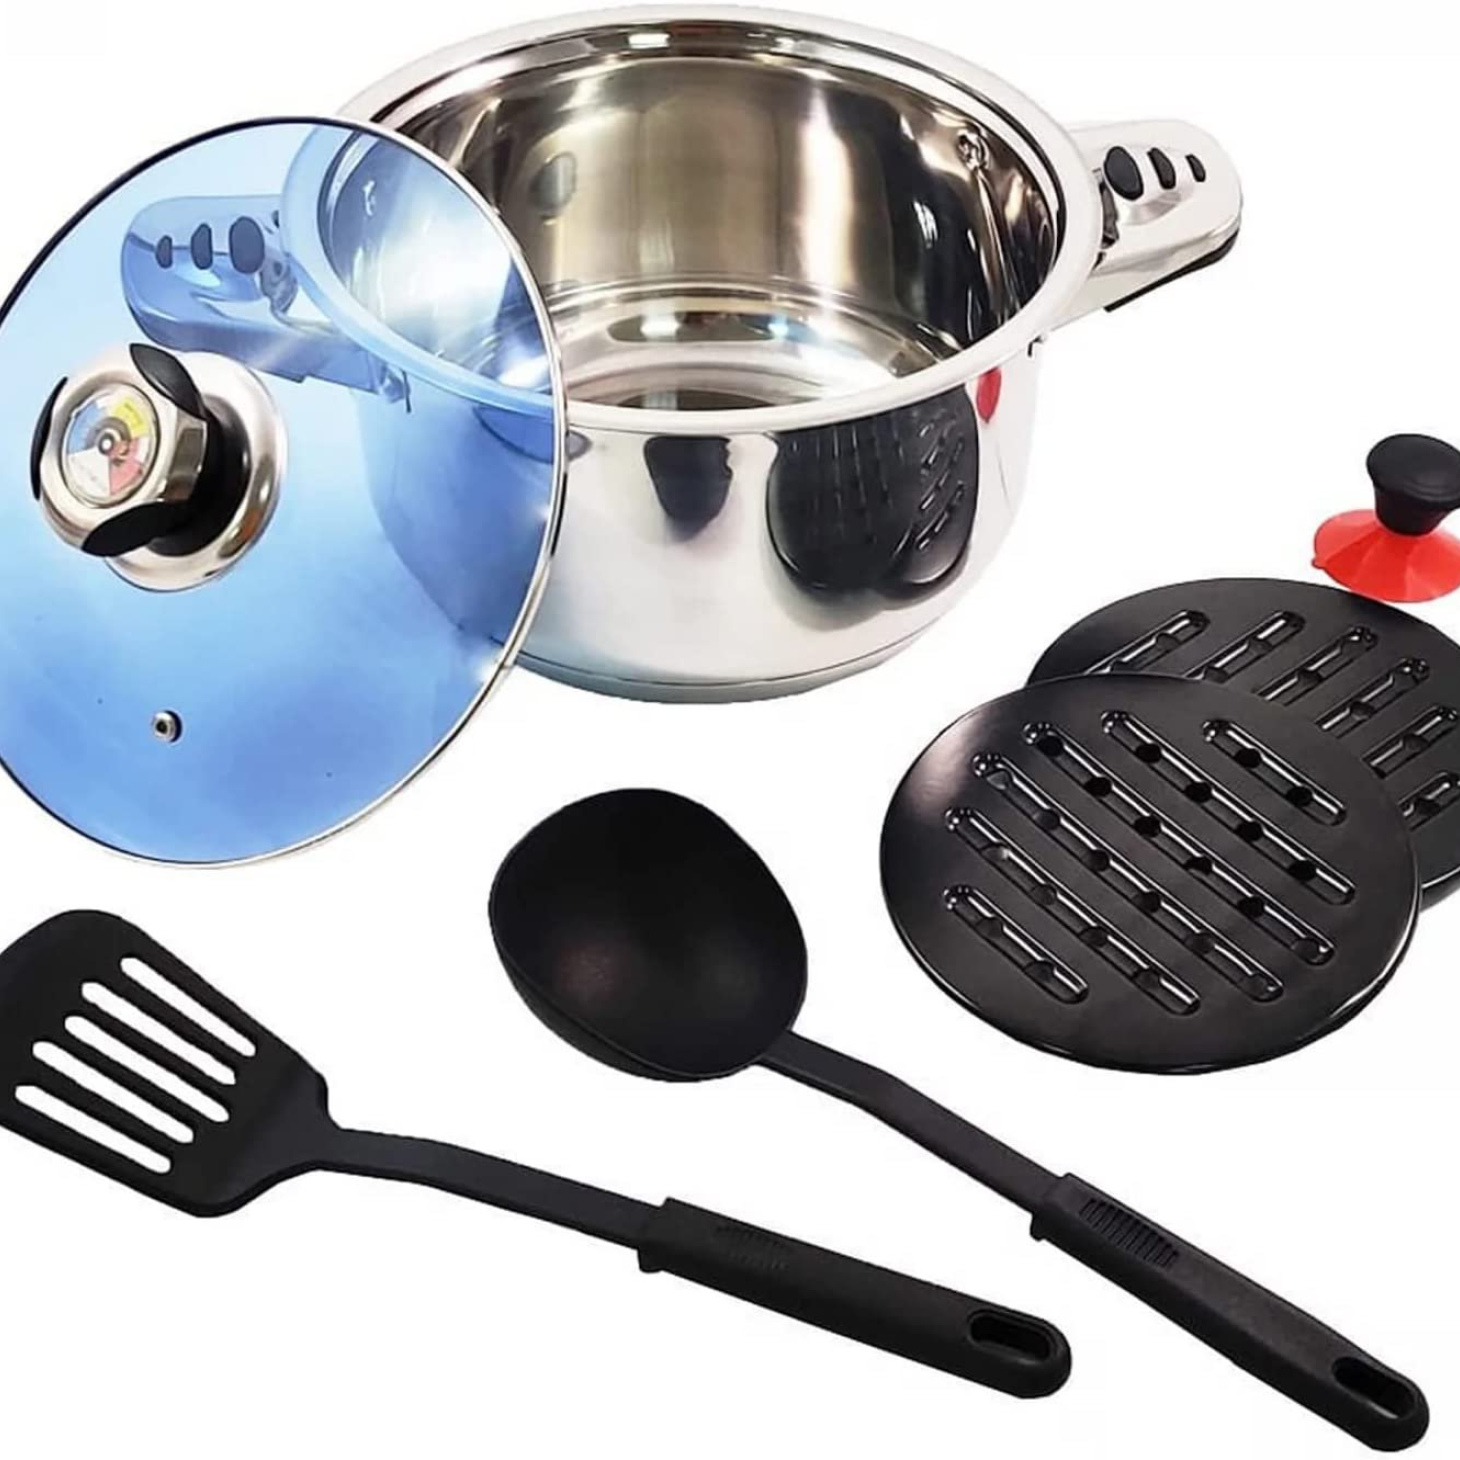 16 pcs, pot set, marble coated, cookware set, thermo knob, glass lids, silver, Royalty Line